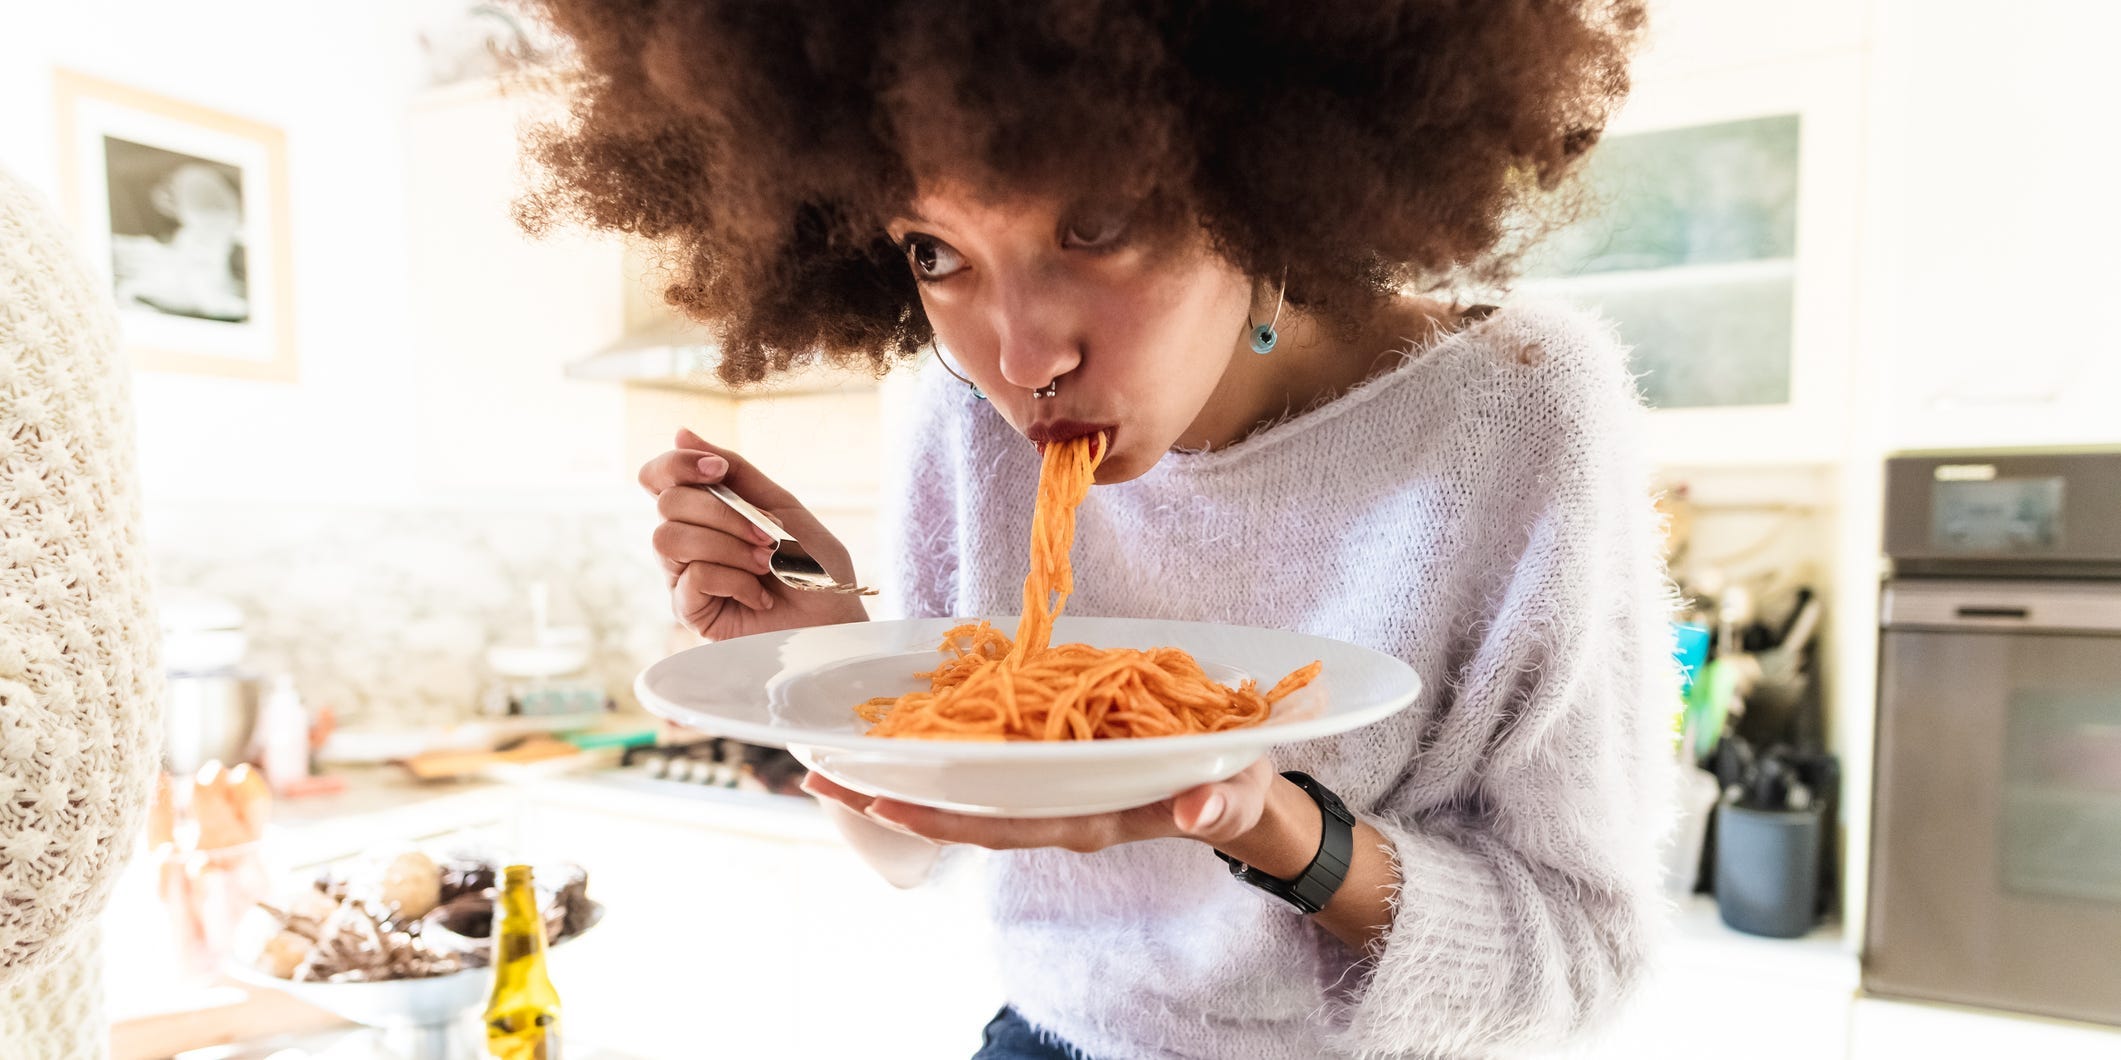 Woman slurping noodles from a plate.